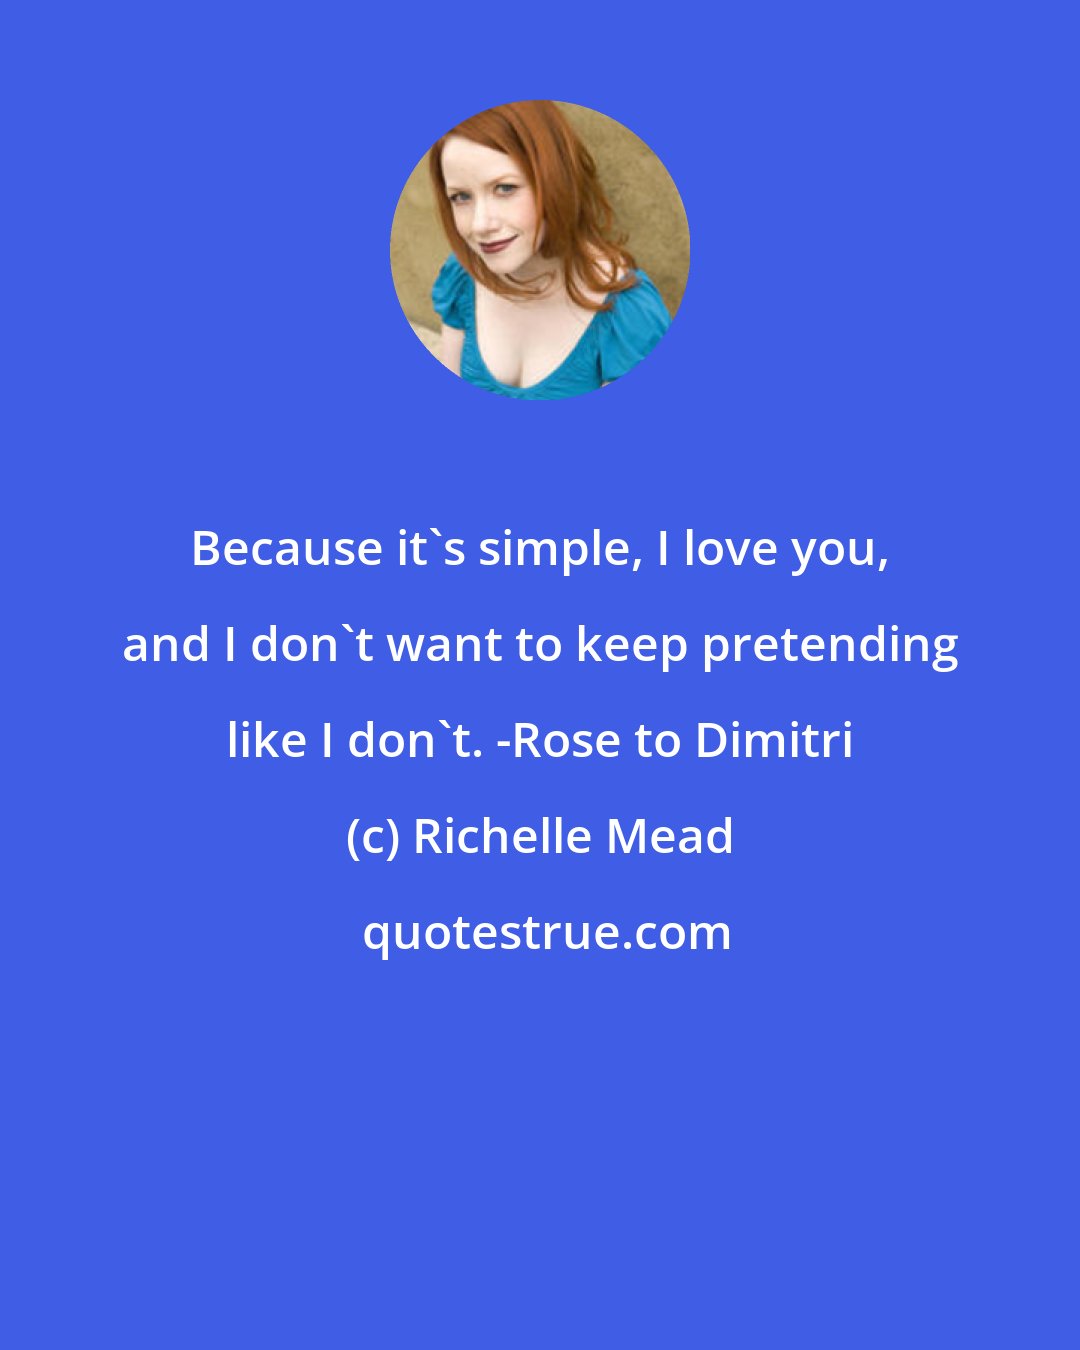 Richelle Mead: Because it's simple, I love you, and I don't want to keep pretending like I don't. -Rose to Dimitri